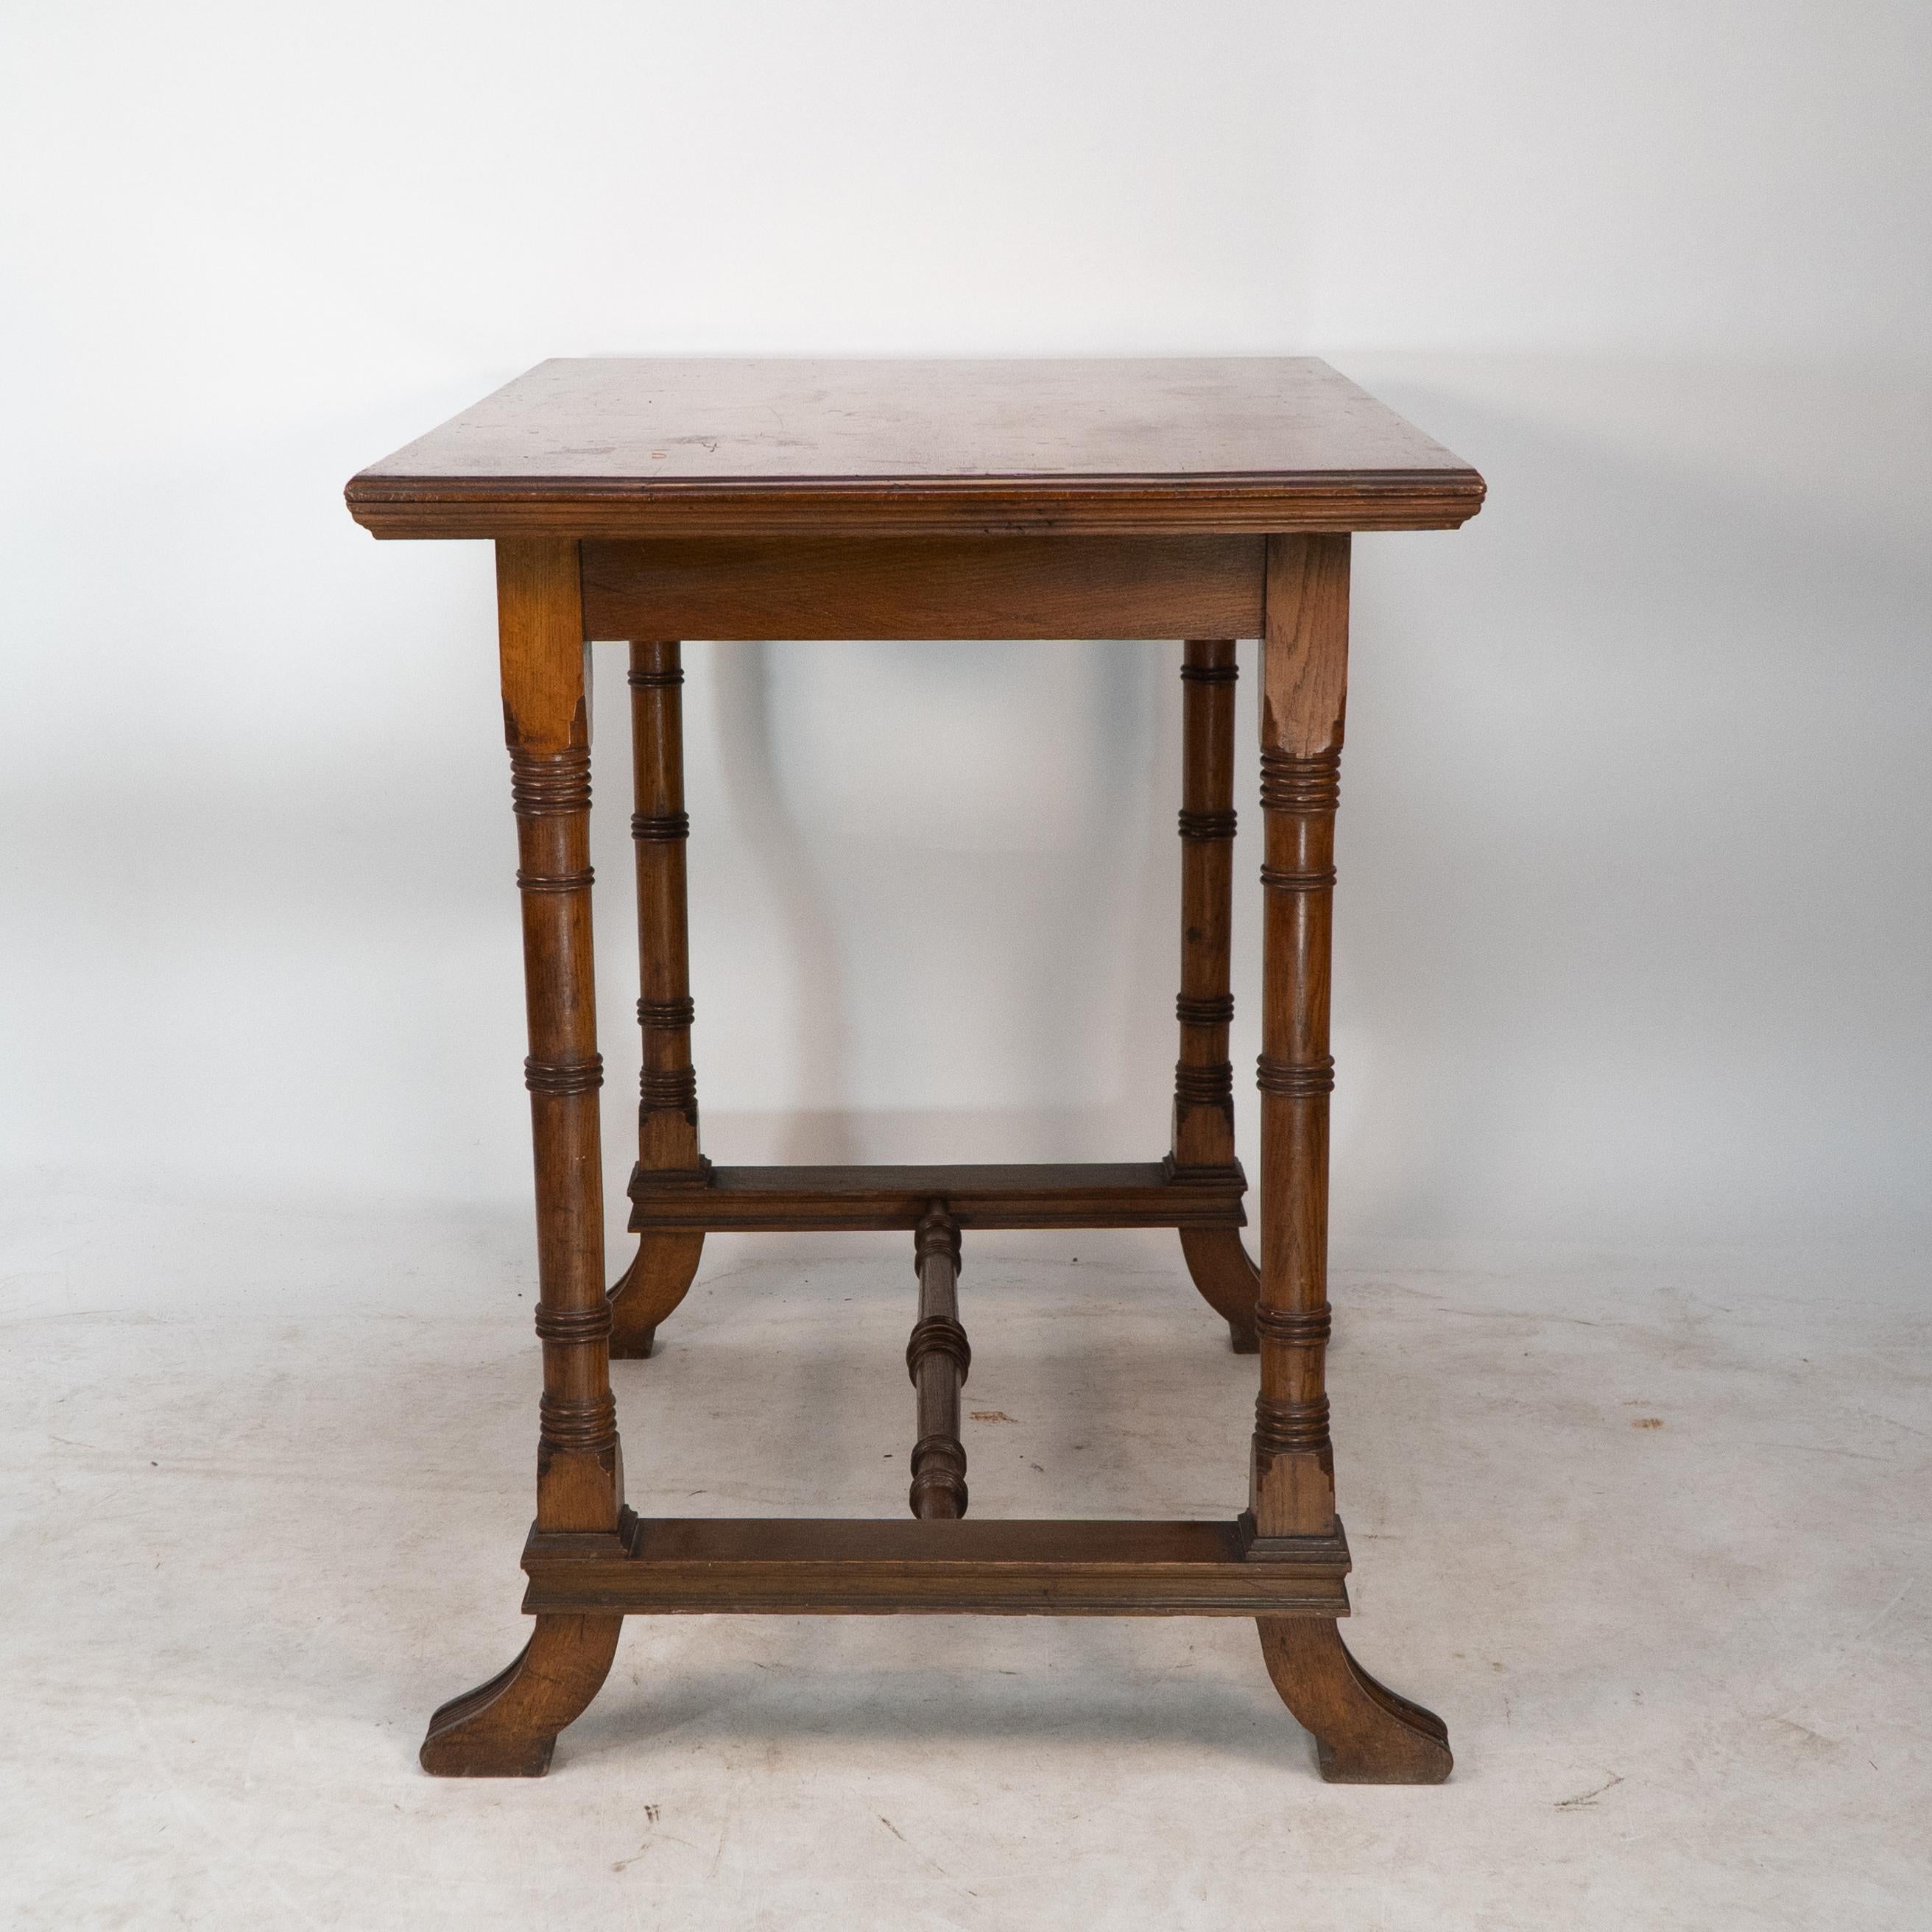 English Aesthetic Movement oak oblong side table with ring turned legs, and splayed feet For Sale